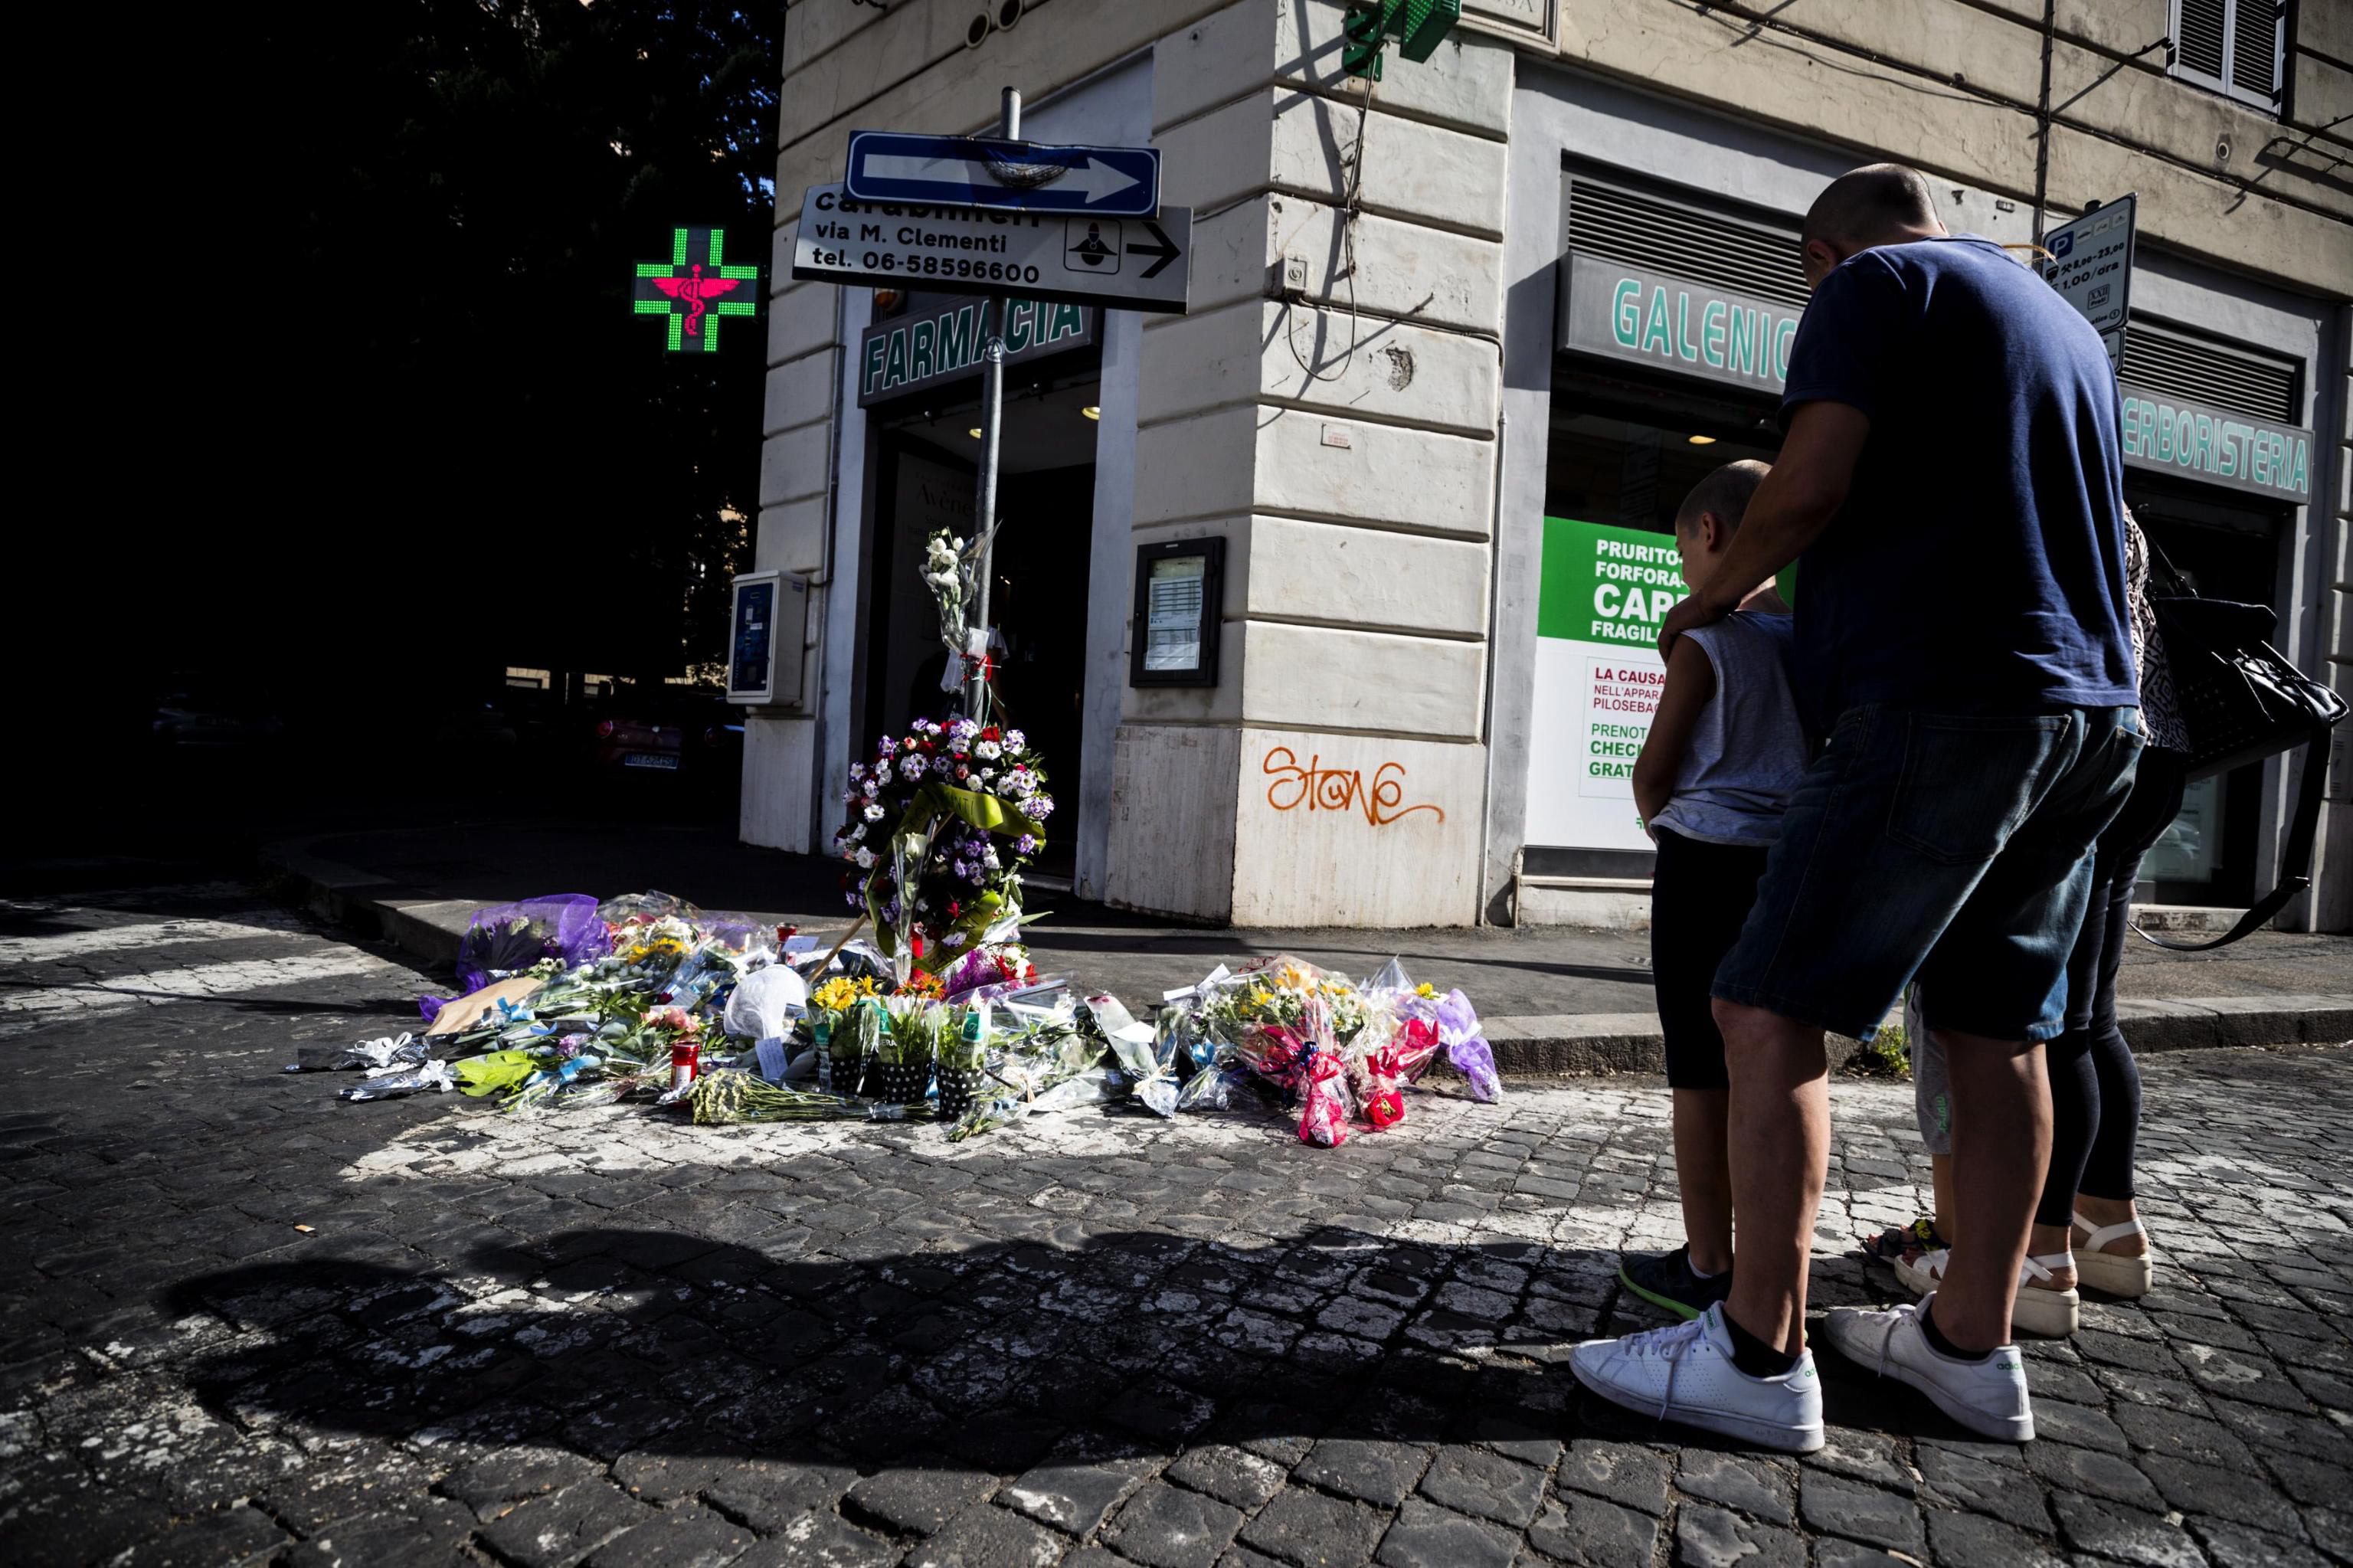 epa07743588 Notes and flowers have been placed at the site where the Carabiniere police officer Mario Cerciello Rega was stabbed to death in Rome, Italy, 27 July 2019. A young US tourist has allegedly confessed to stabbing to death Mario Cerciello Rega, a Carabiniere police officer who was investigating the theft of a bag and cellphone before dawn on 26 July 2019.  EPA/ANGELO CARCONI